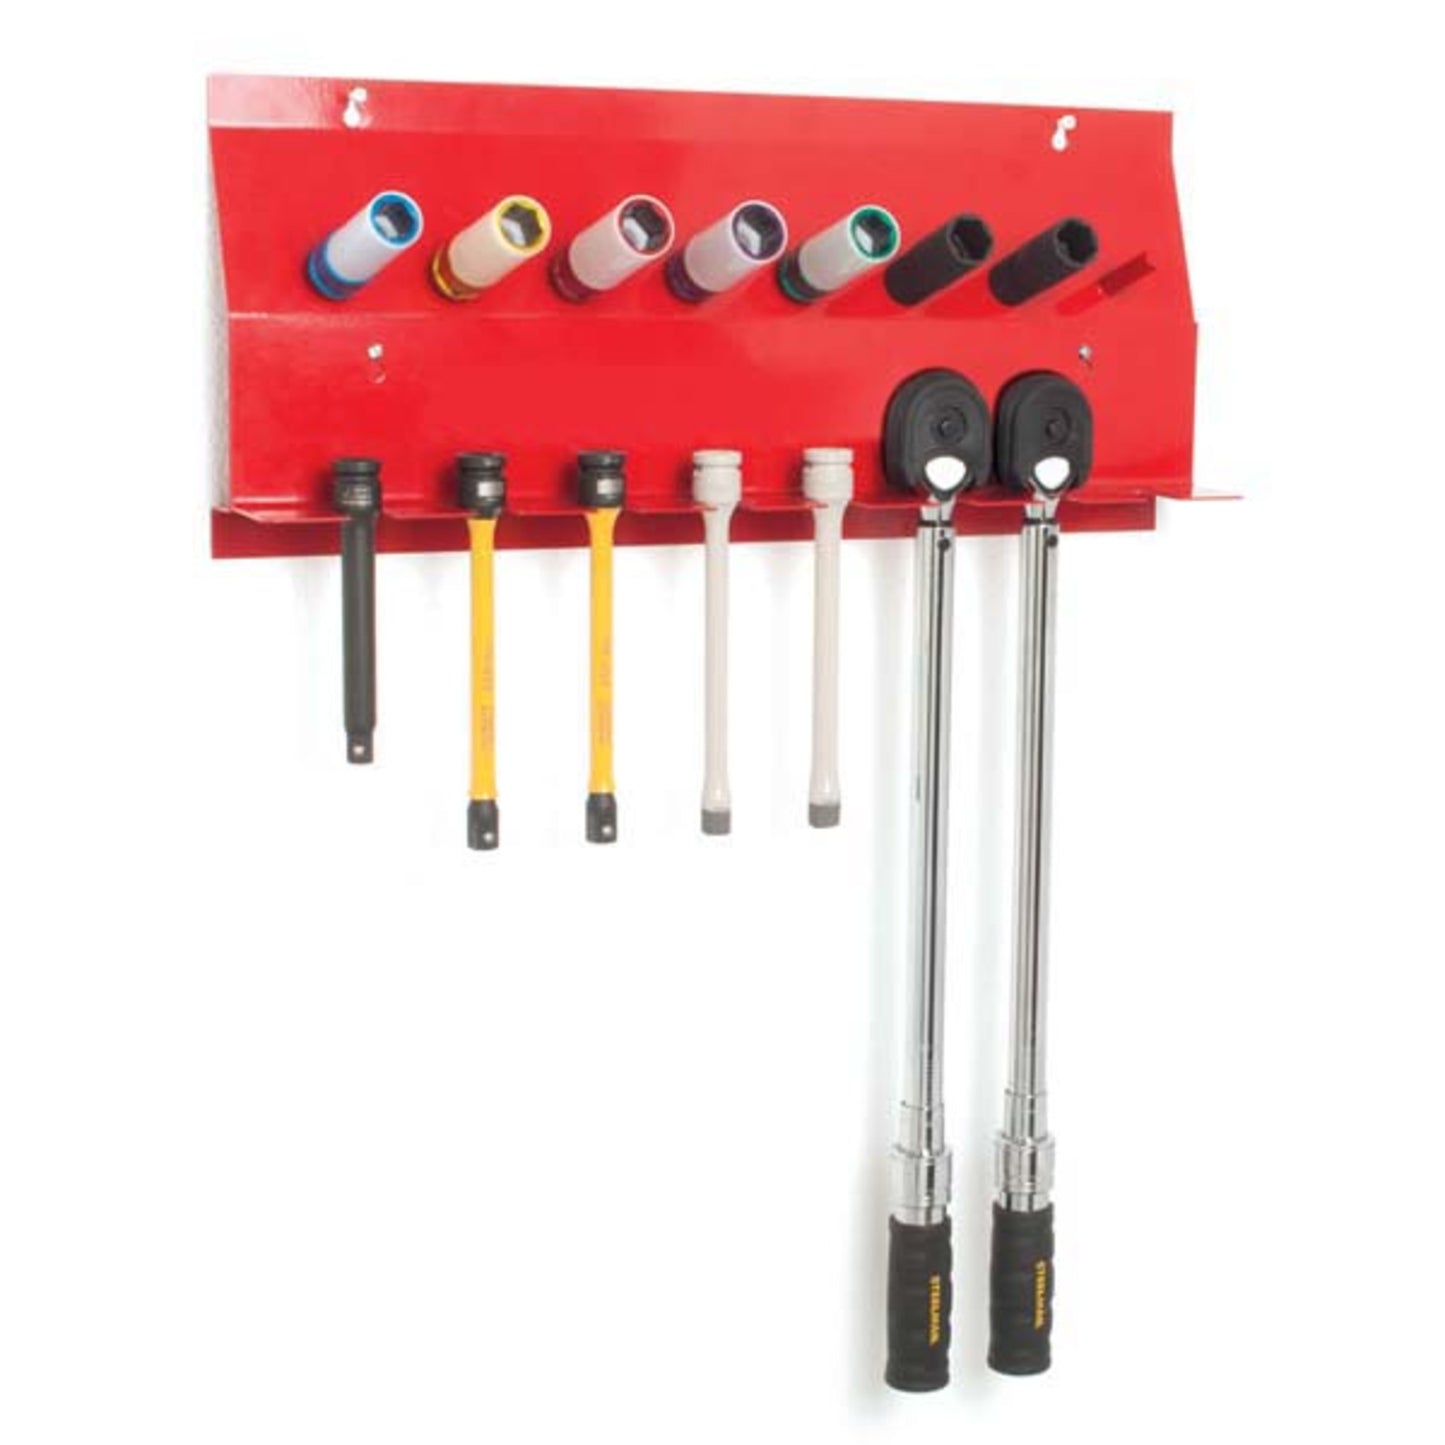 8-Slot, 8-Peg Wall Mounted Storage Bracket for Tools, Sockets, Wrenches, and Extensions